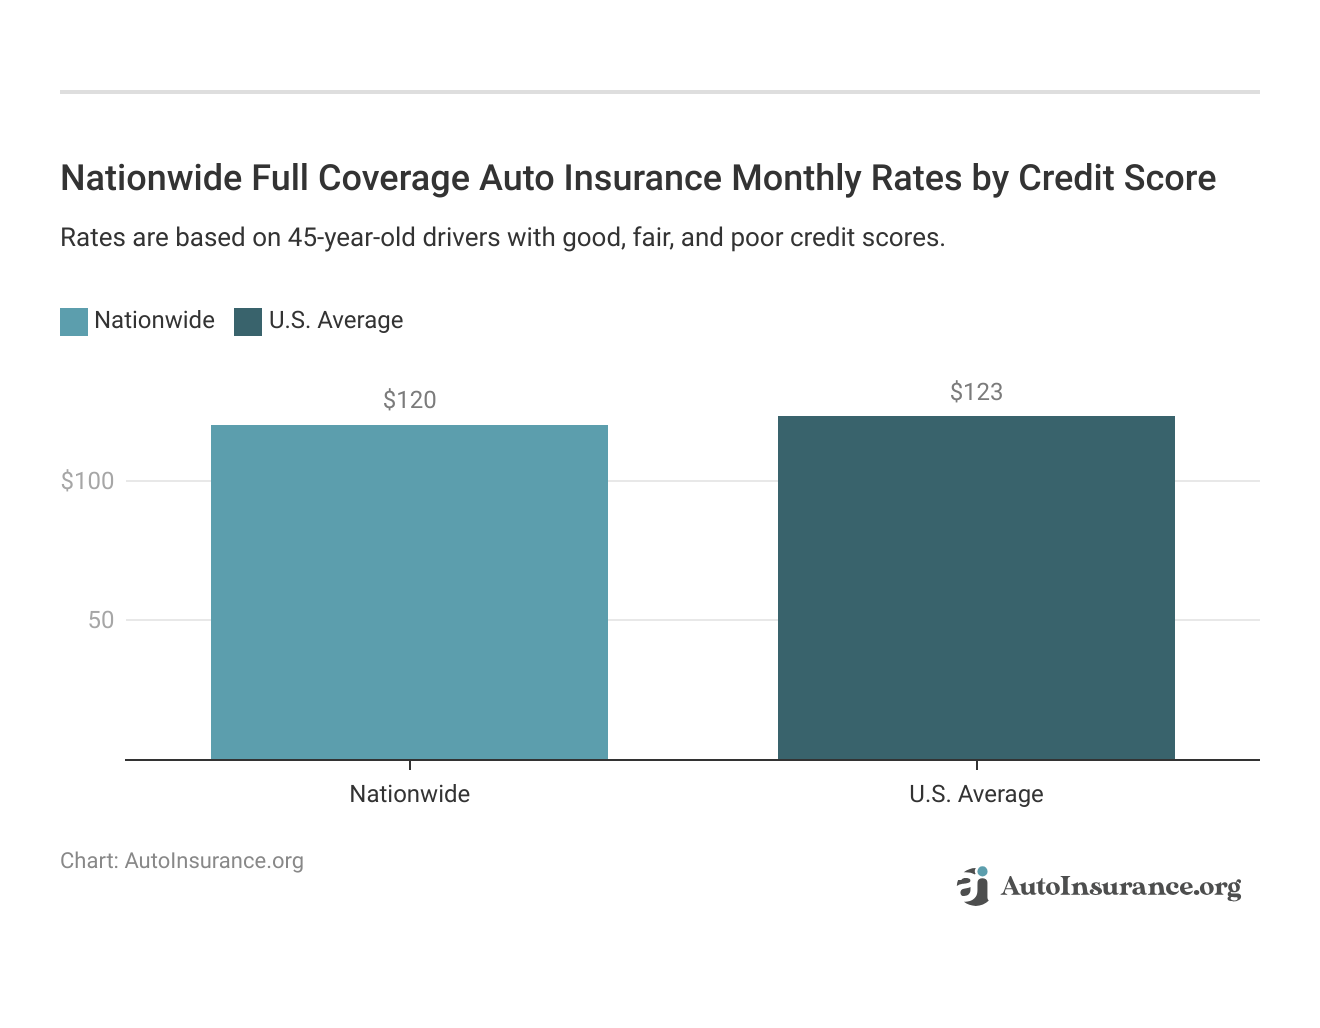 <h3>Nationwide Full Coverage Auto Insurance Monthly Rates by Credit Score</h3>